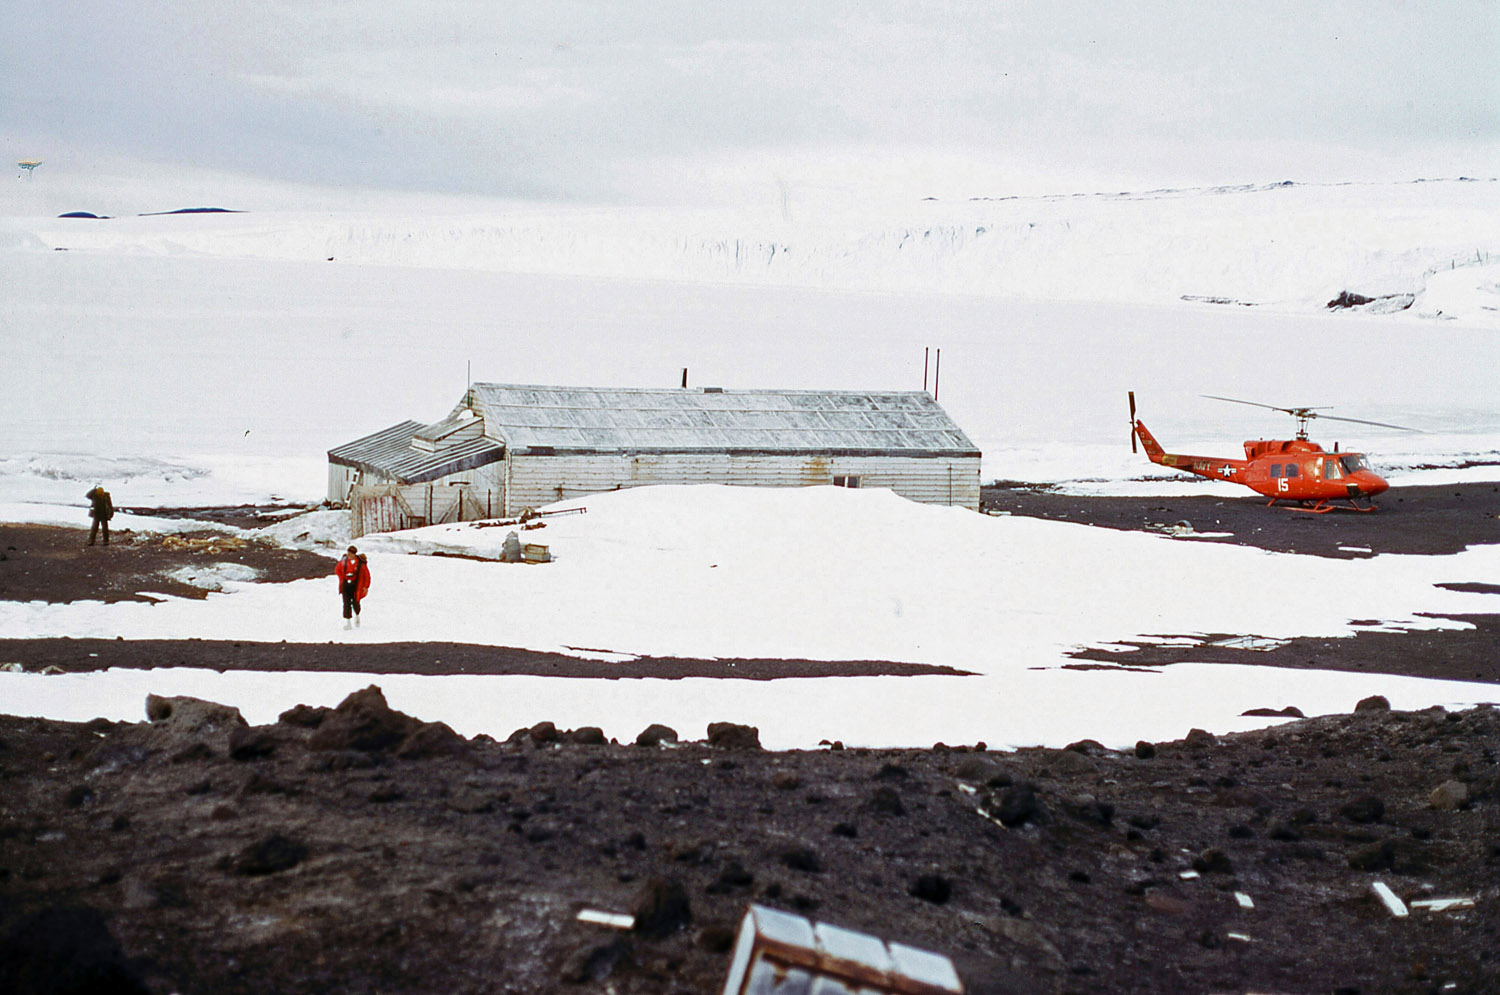 Antarctica Aircraft - Helicopter at Cape Evans Hut